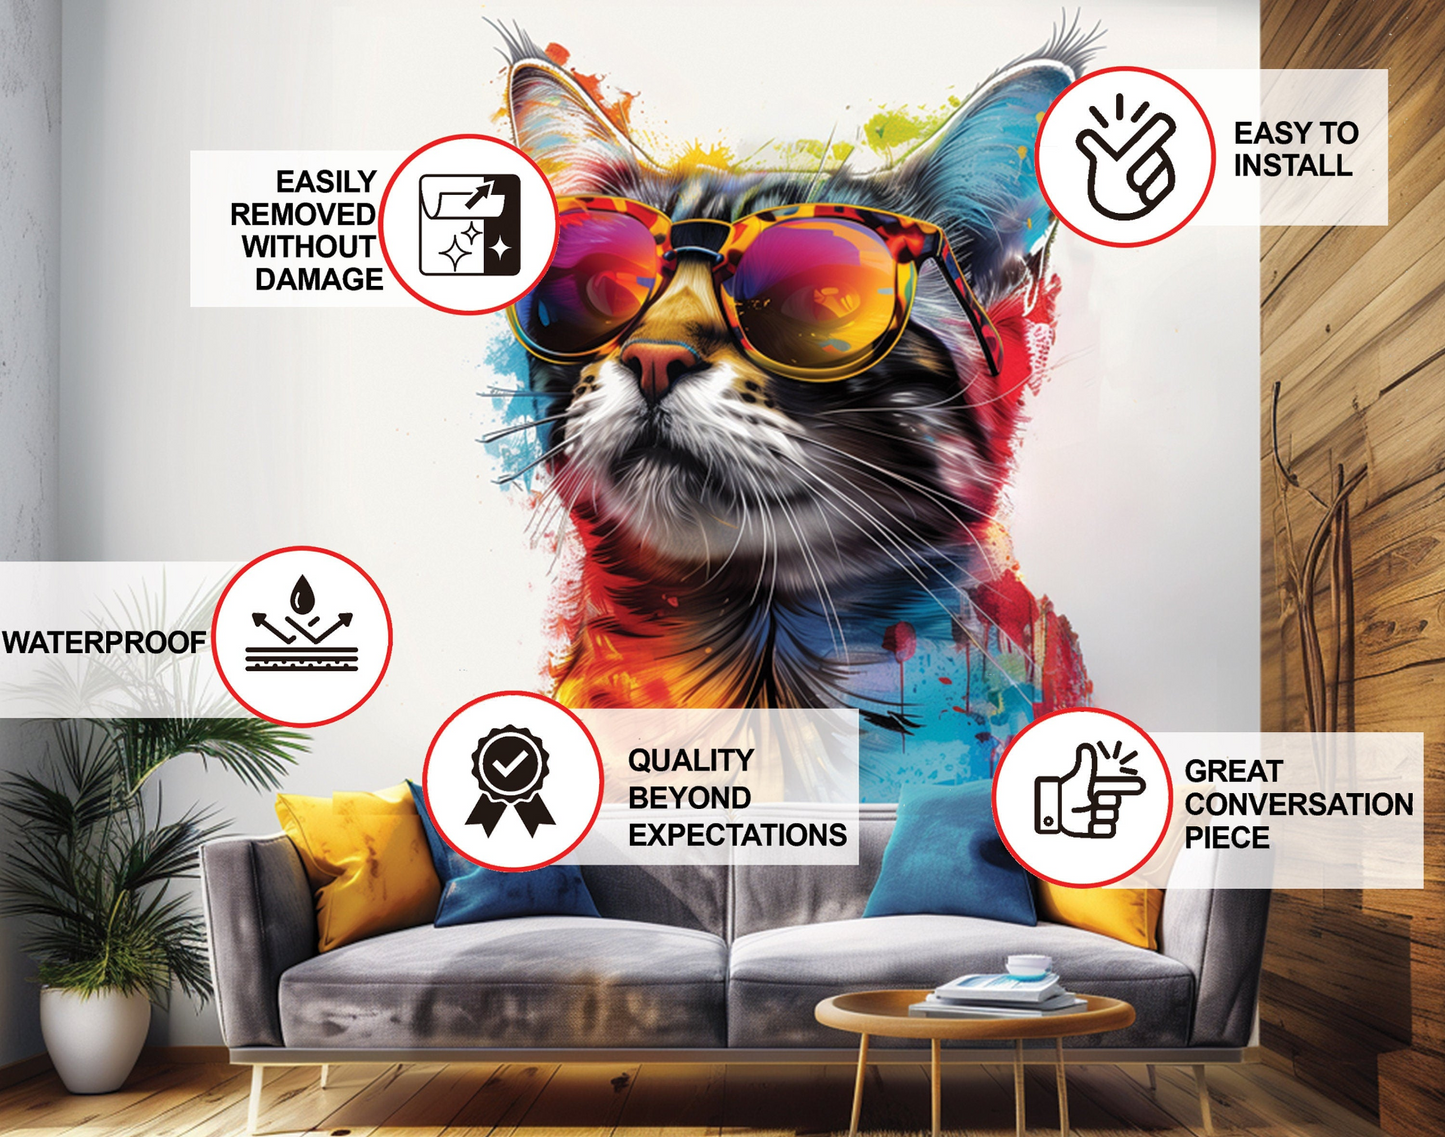 Colorful Maine Coon Cat Wall Sticker with Sunglasses - Modern Kittent Art Decal, Goodies N Stuff